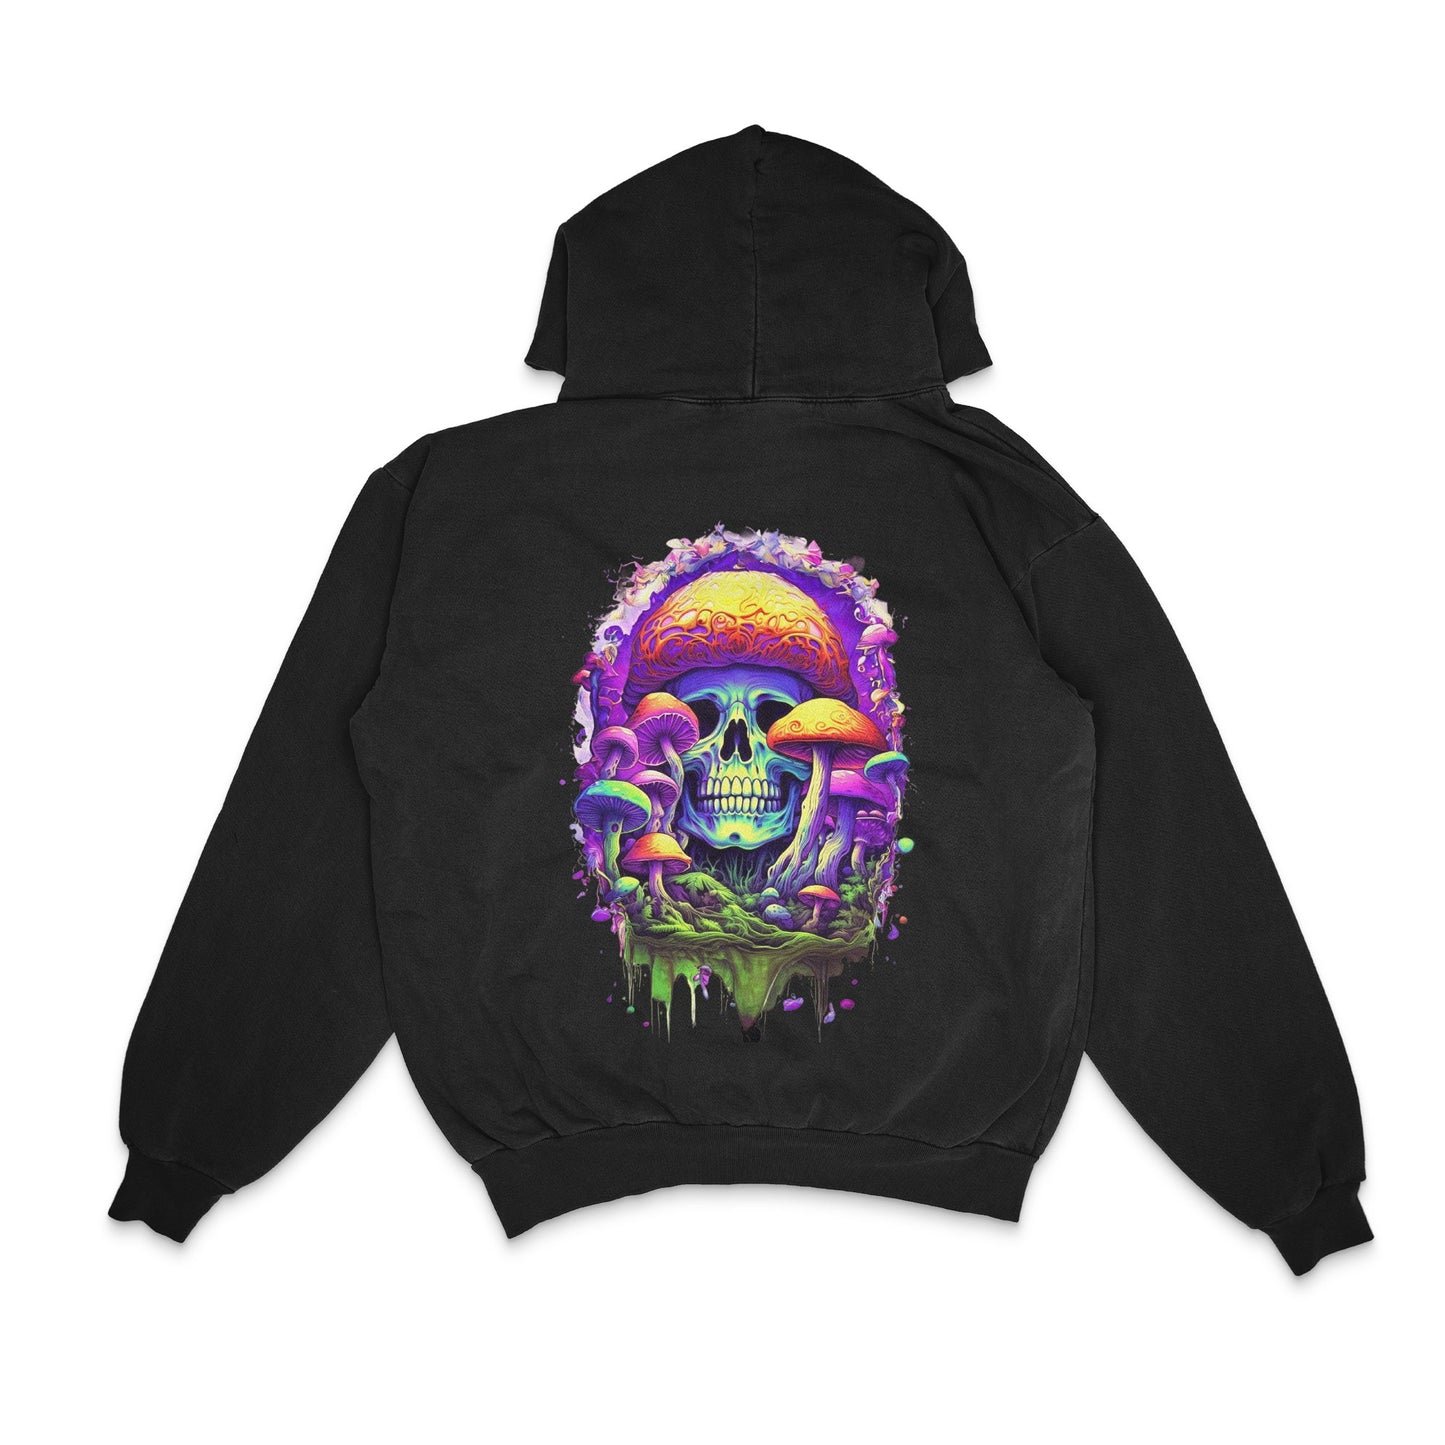 the_skull_and_mushroom_design_with_a_girl_wearing_a__b2ed024f-f315-40ee-bc4d-2e6b6bde2348 - Back